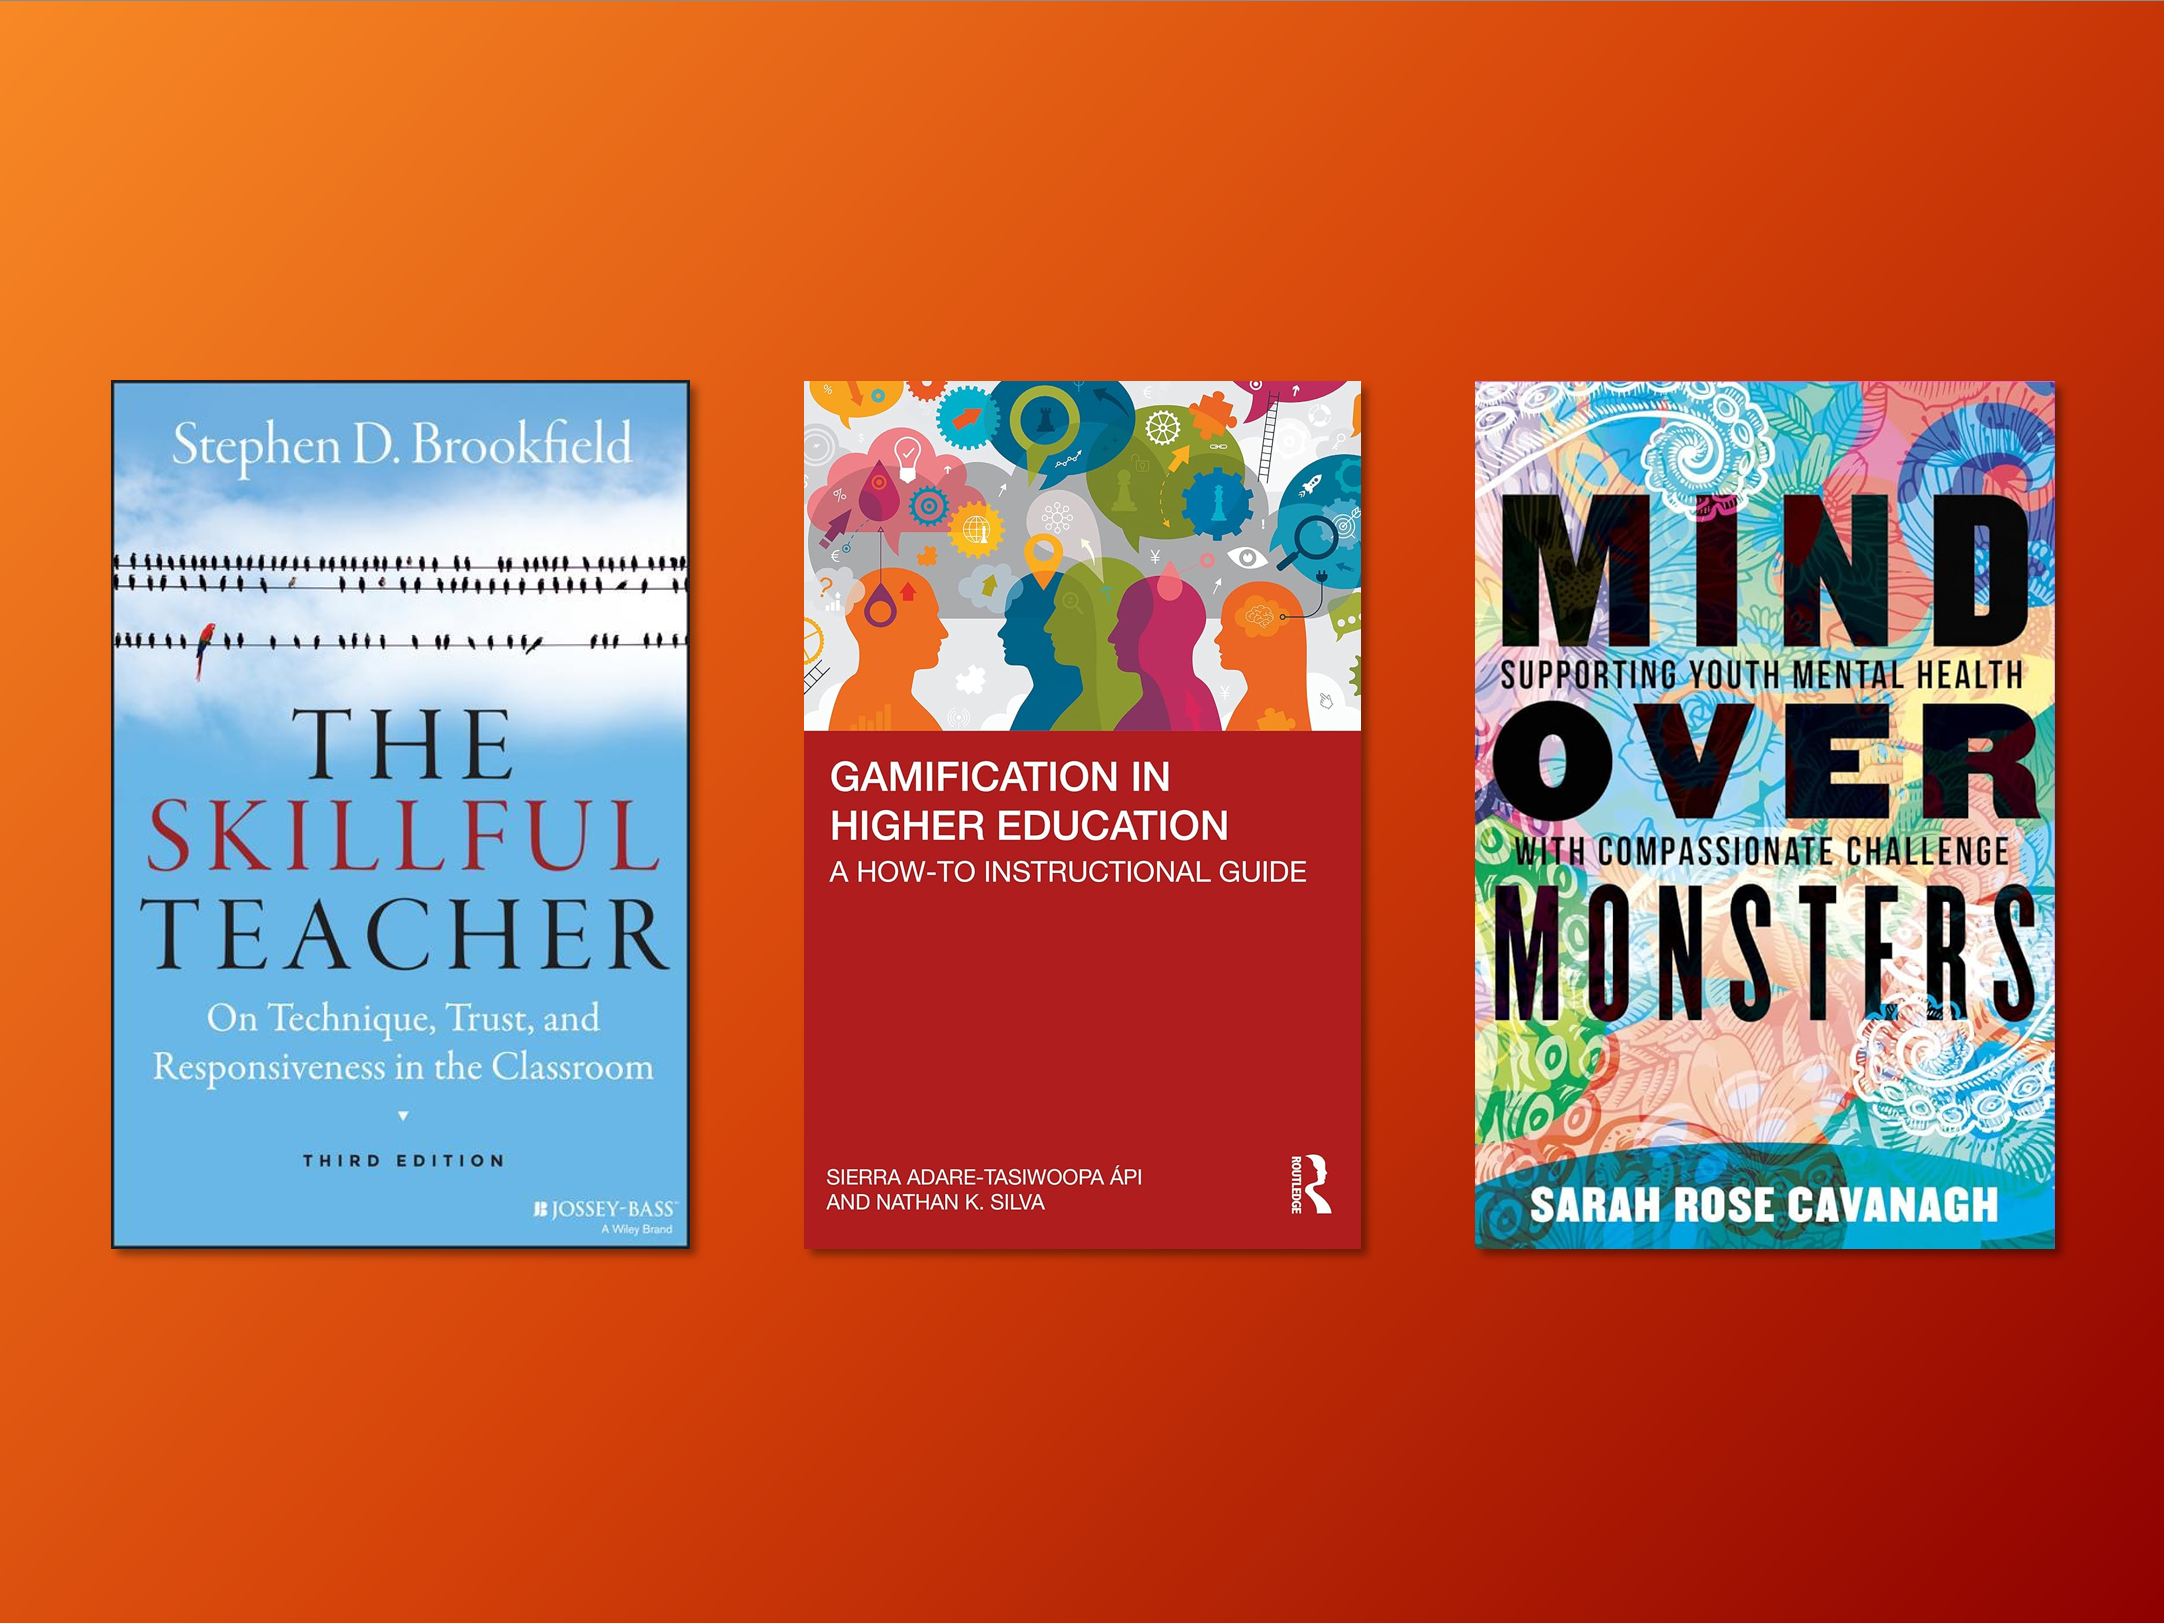 Books that will be explored in the spring Learning Communities.